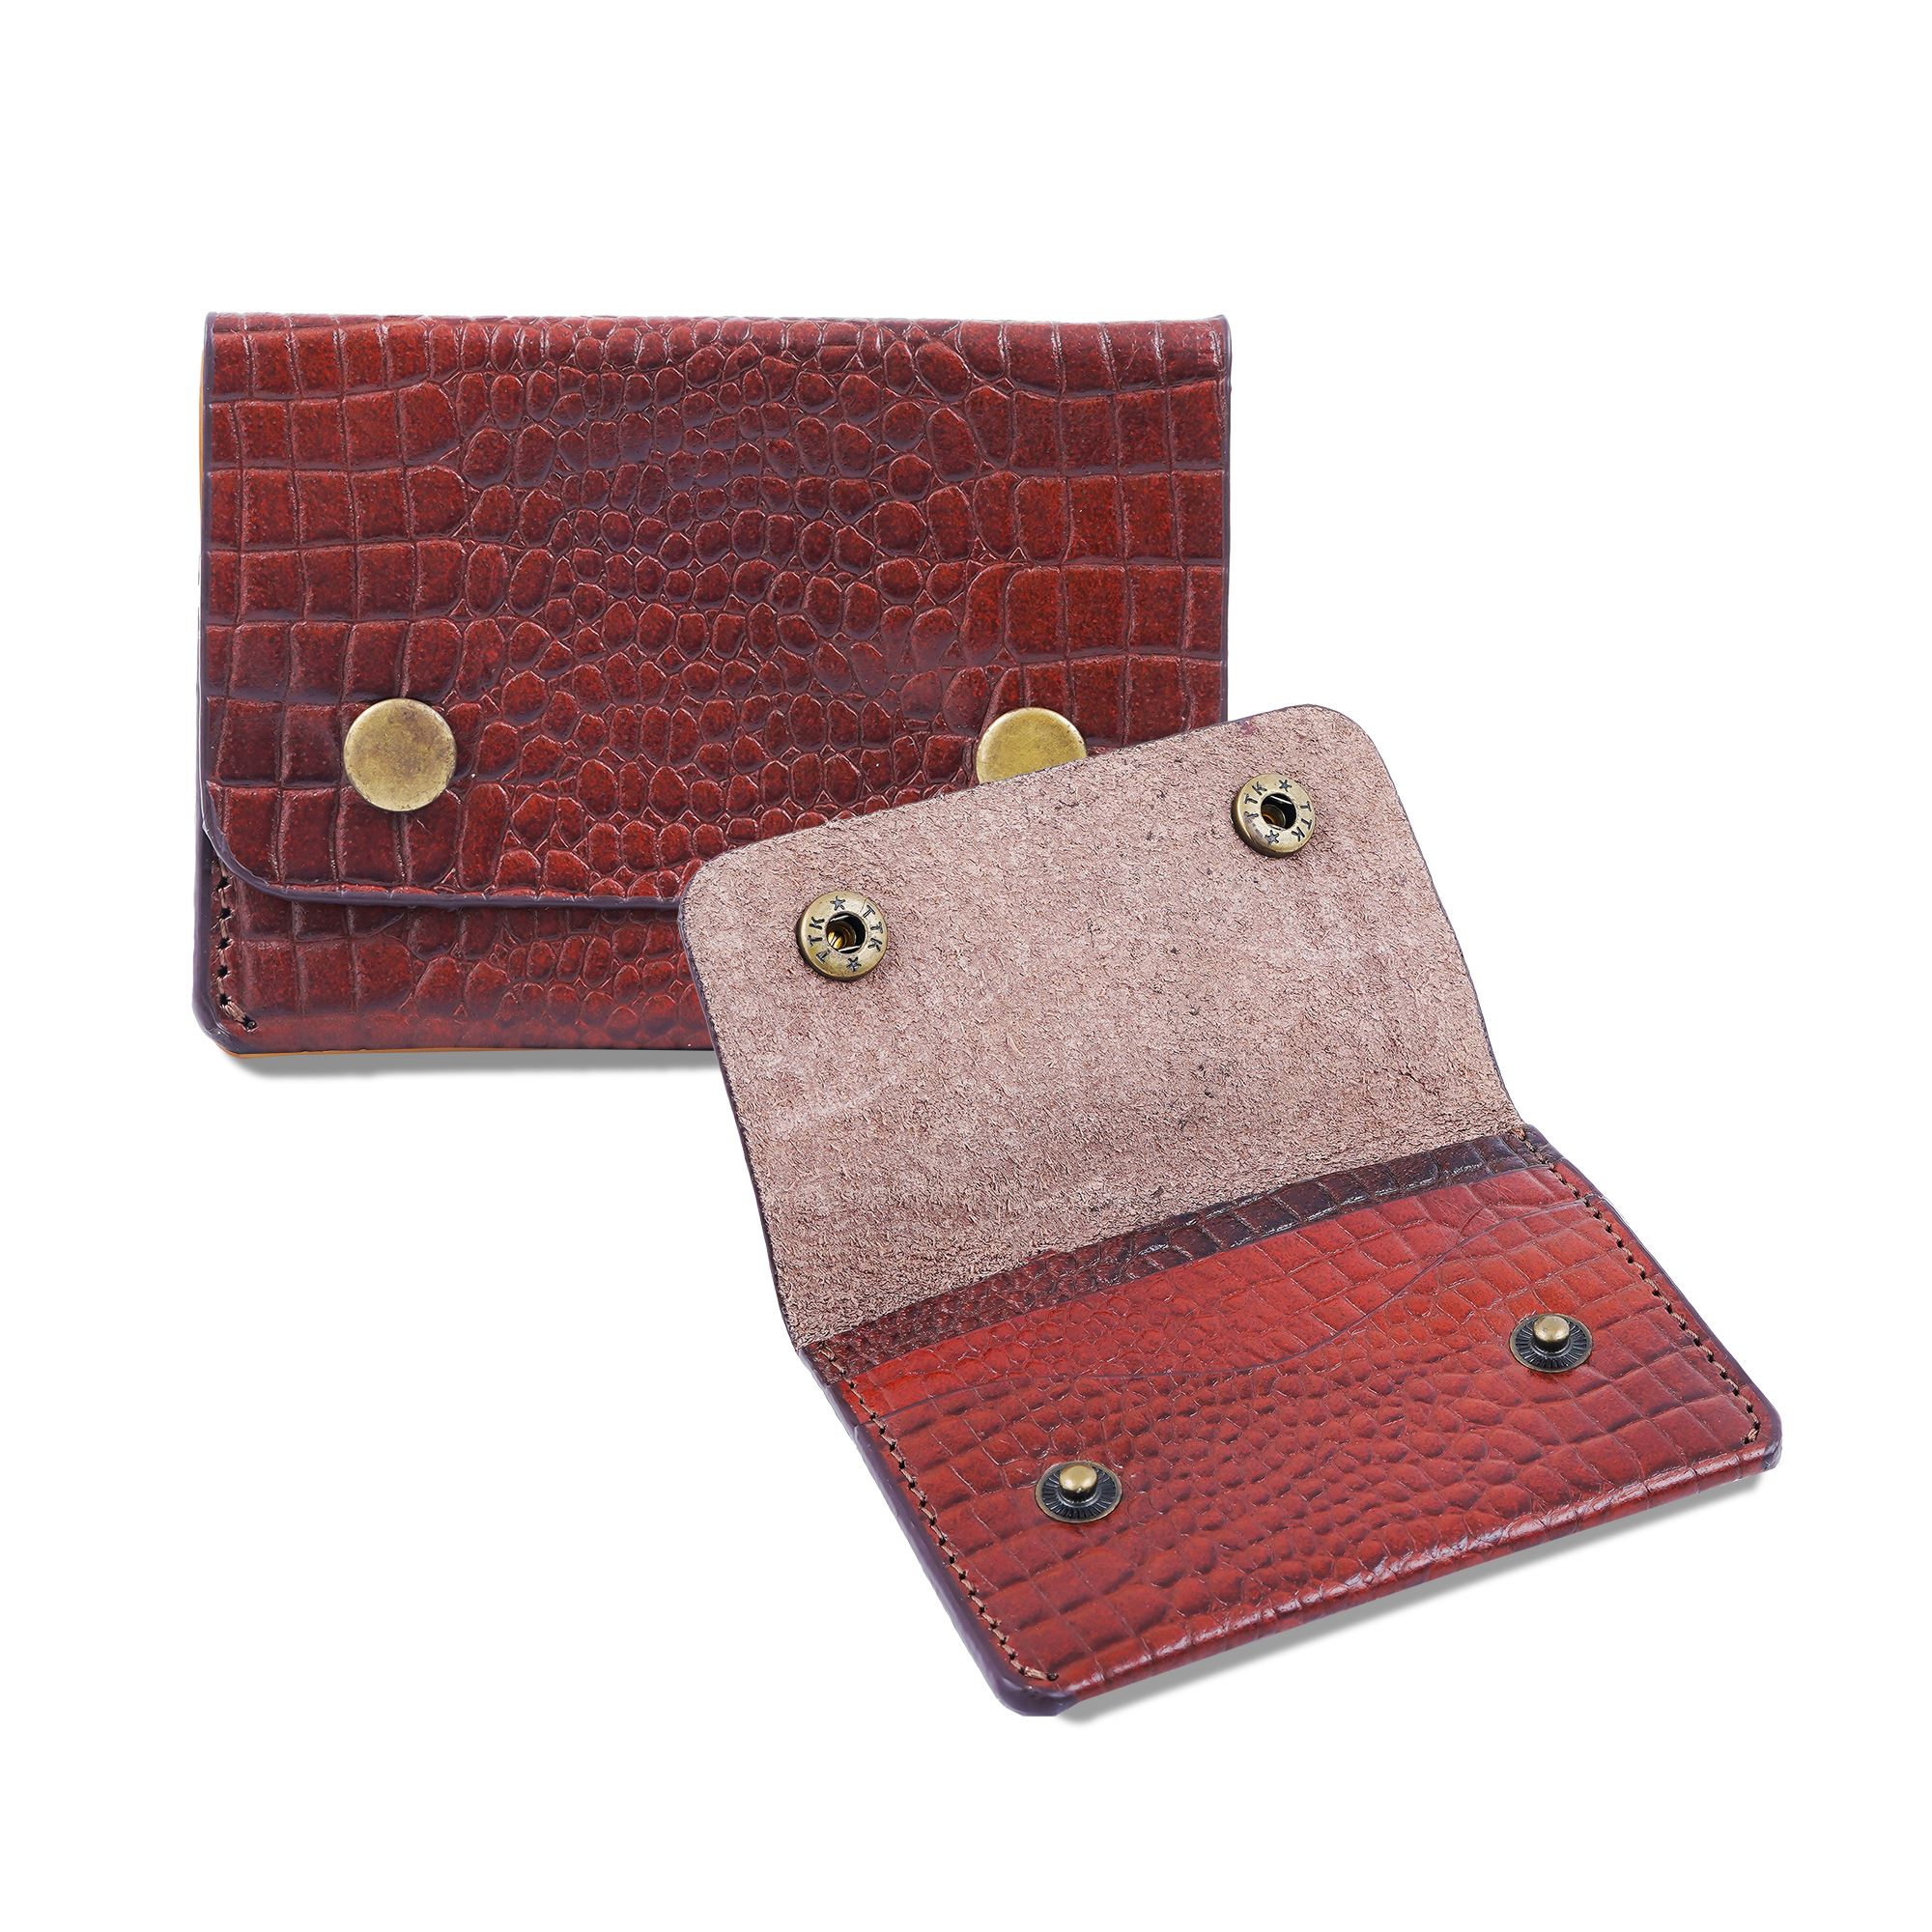 Leather Riveted Wallet for Men and Women | Brown Croco-asset-331